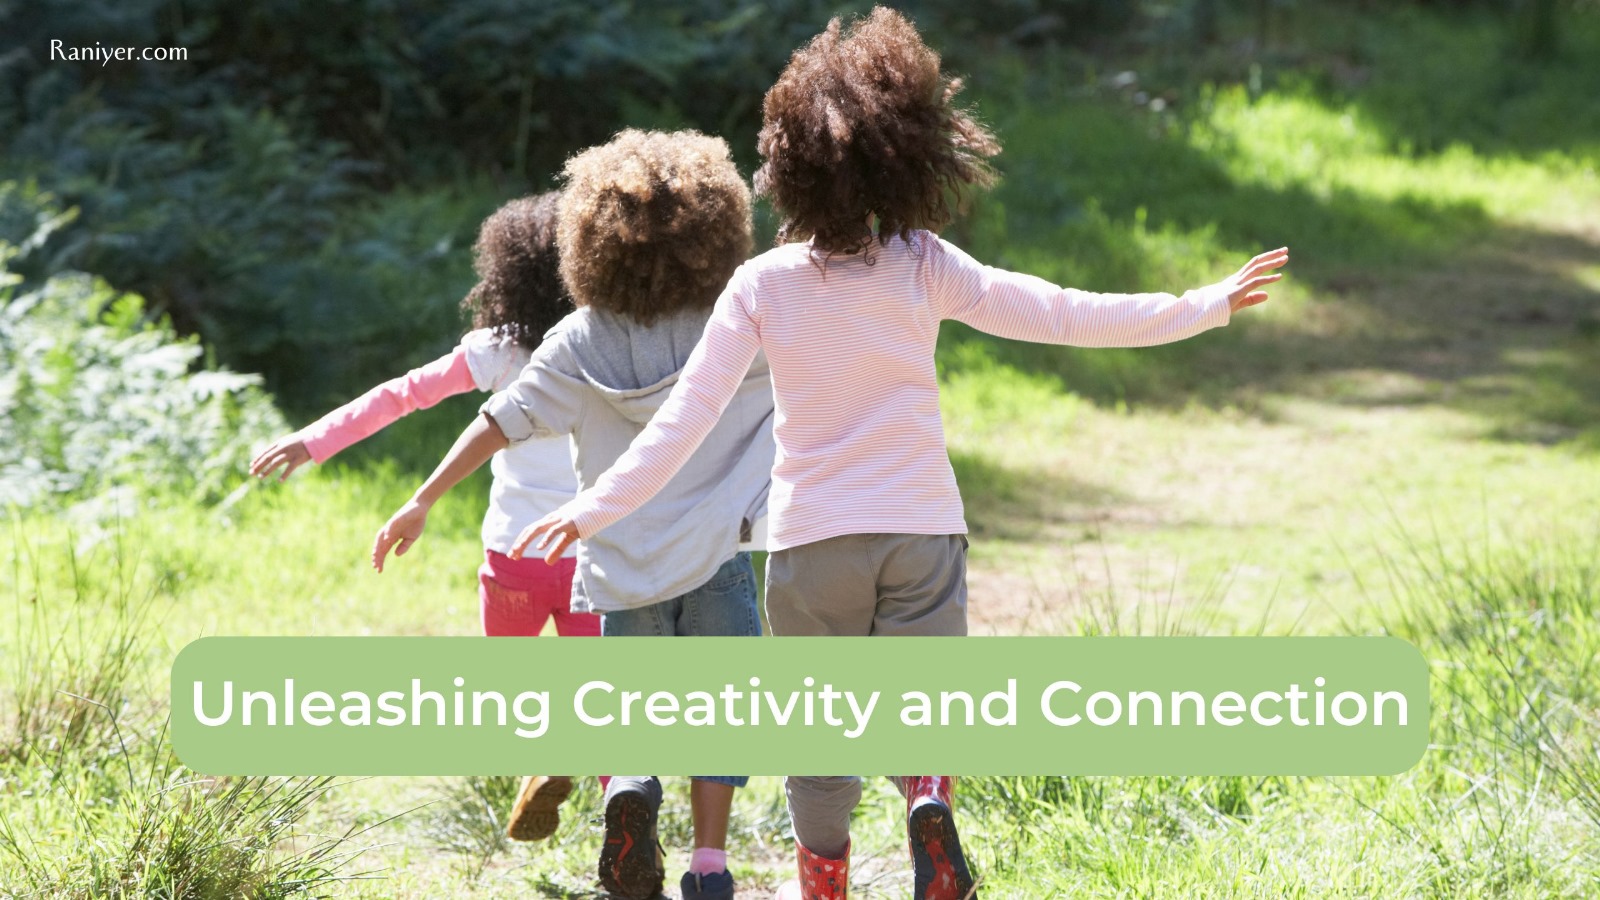 Unleashing Creativity and Connection: Exploring the 11 Types of Play in the Great Outdoors